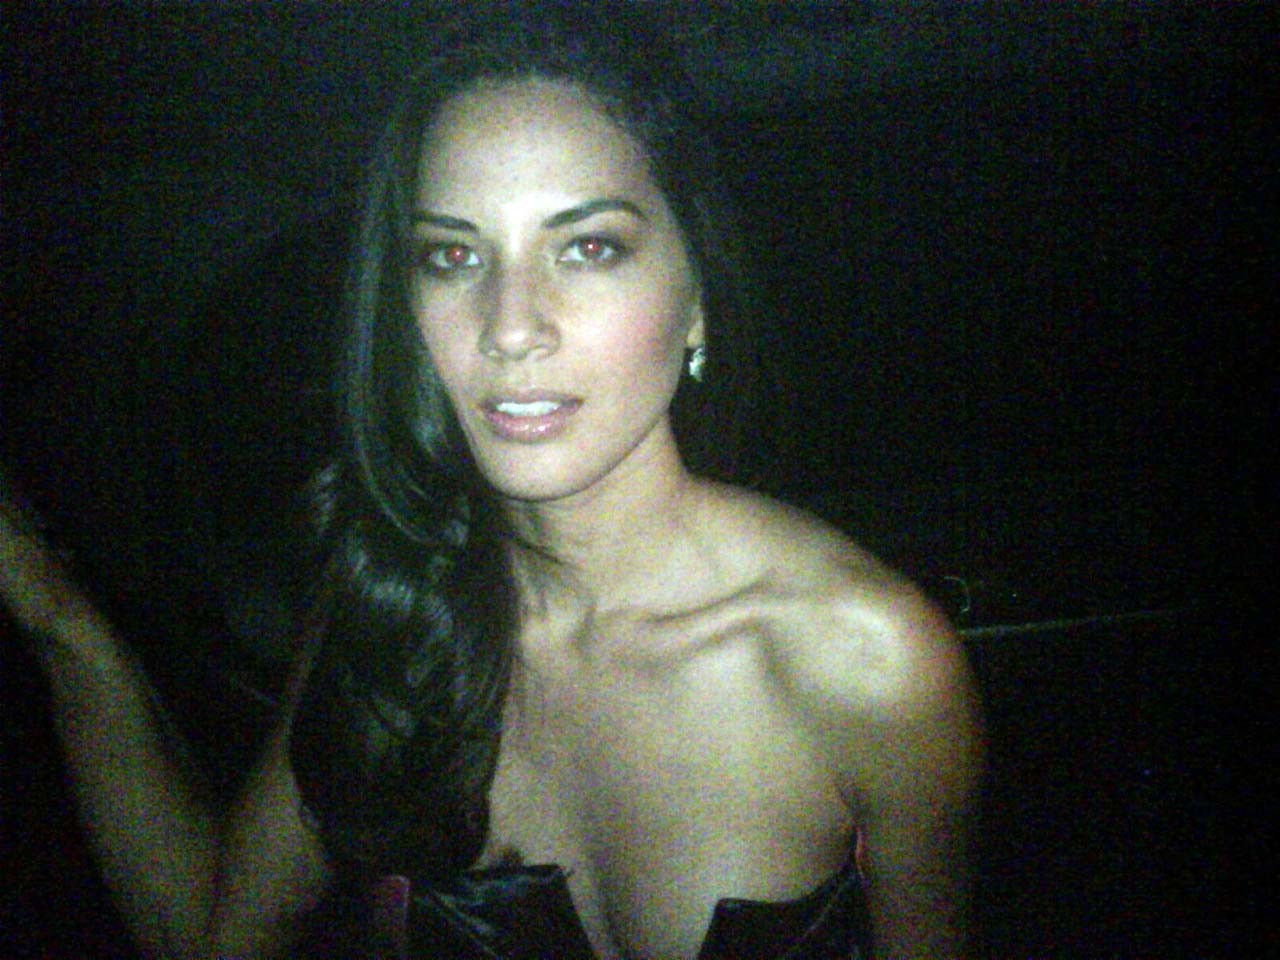 Olivia Munn looking fucking sexy and hot on her private photos #75297744